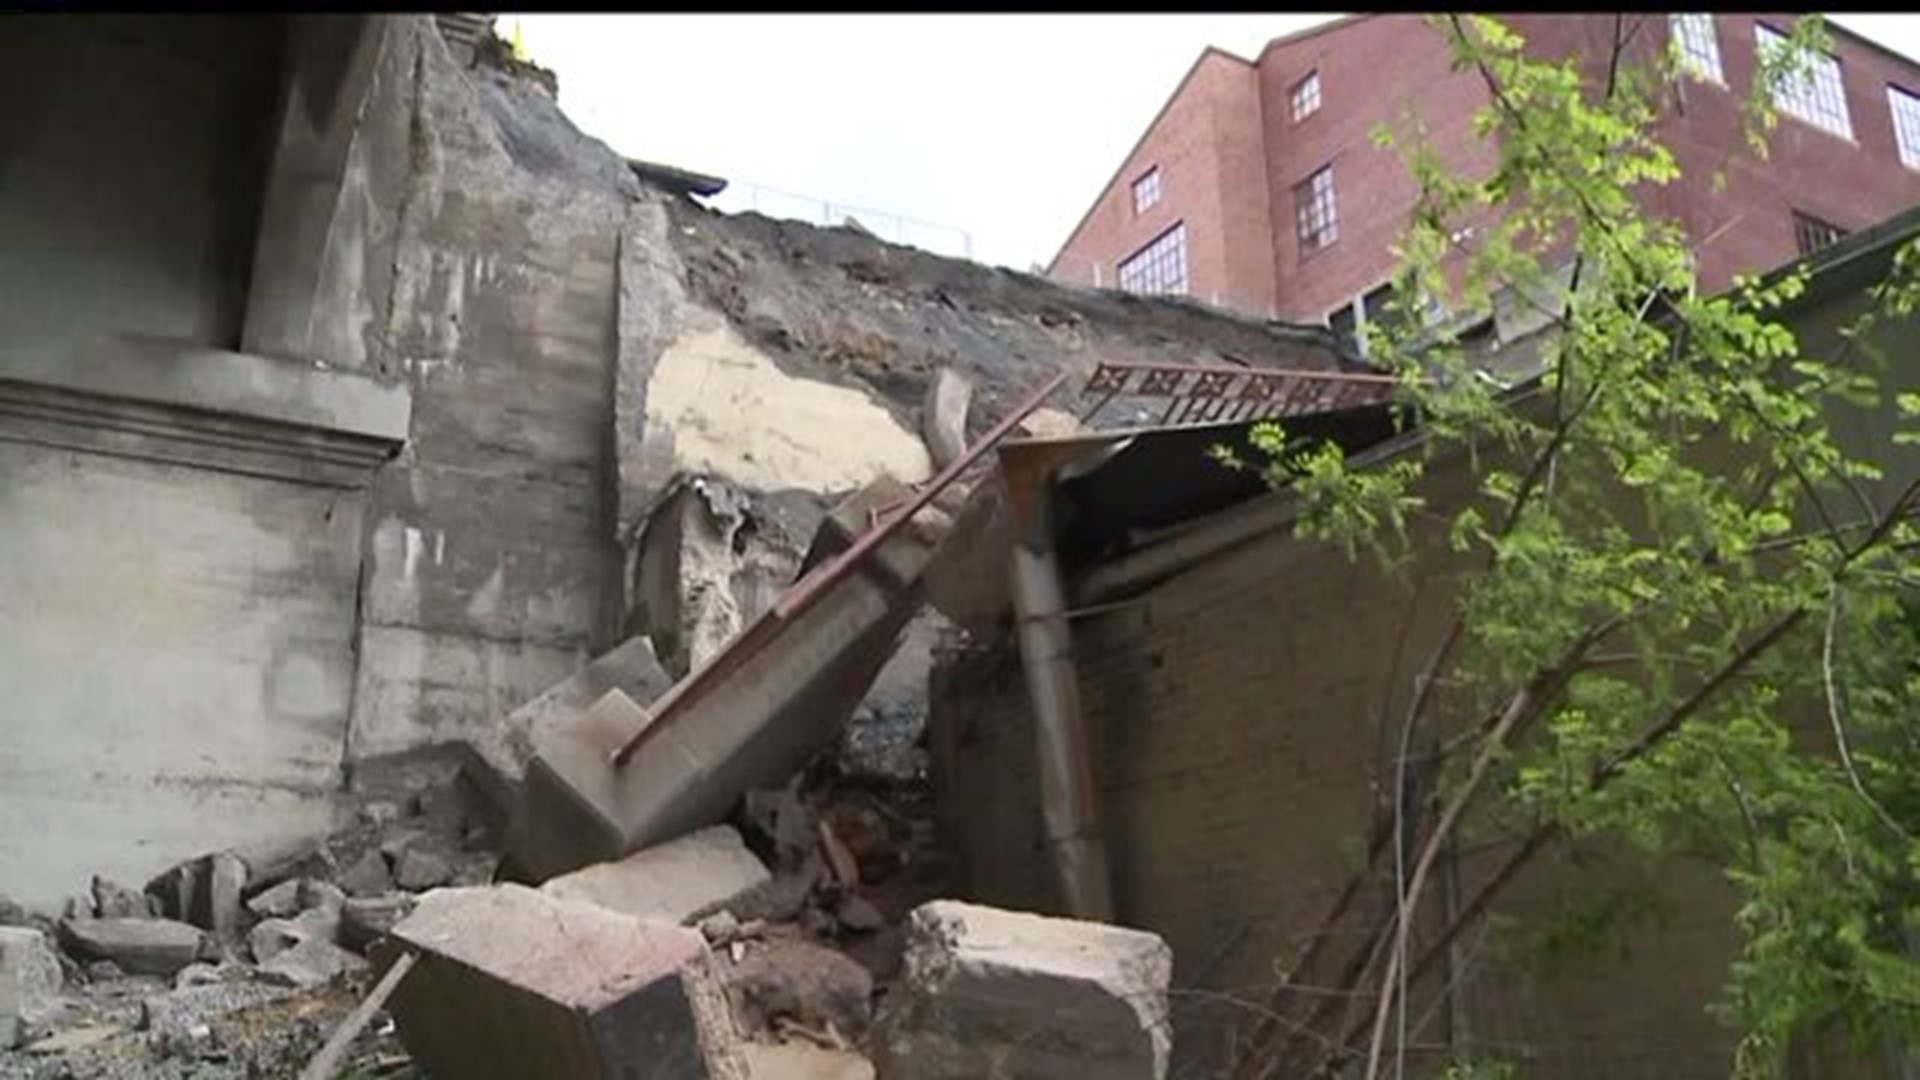 PennDOT internal investigation finds agency not liable for wall collapse